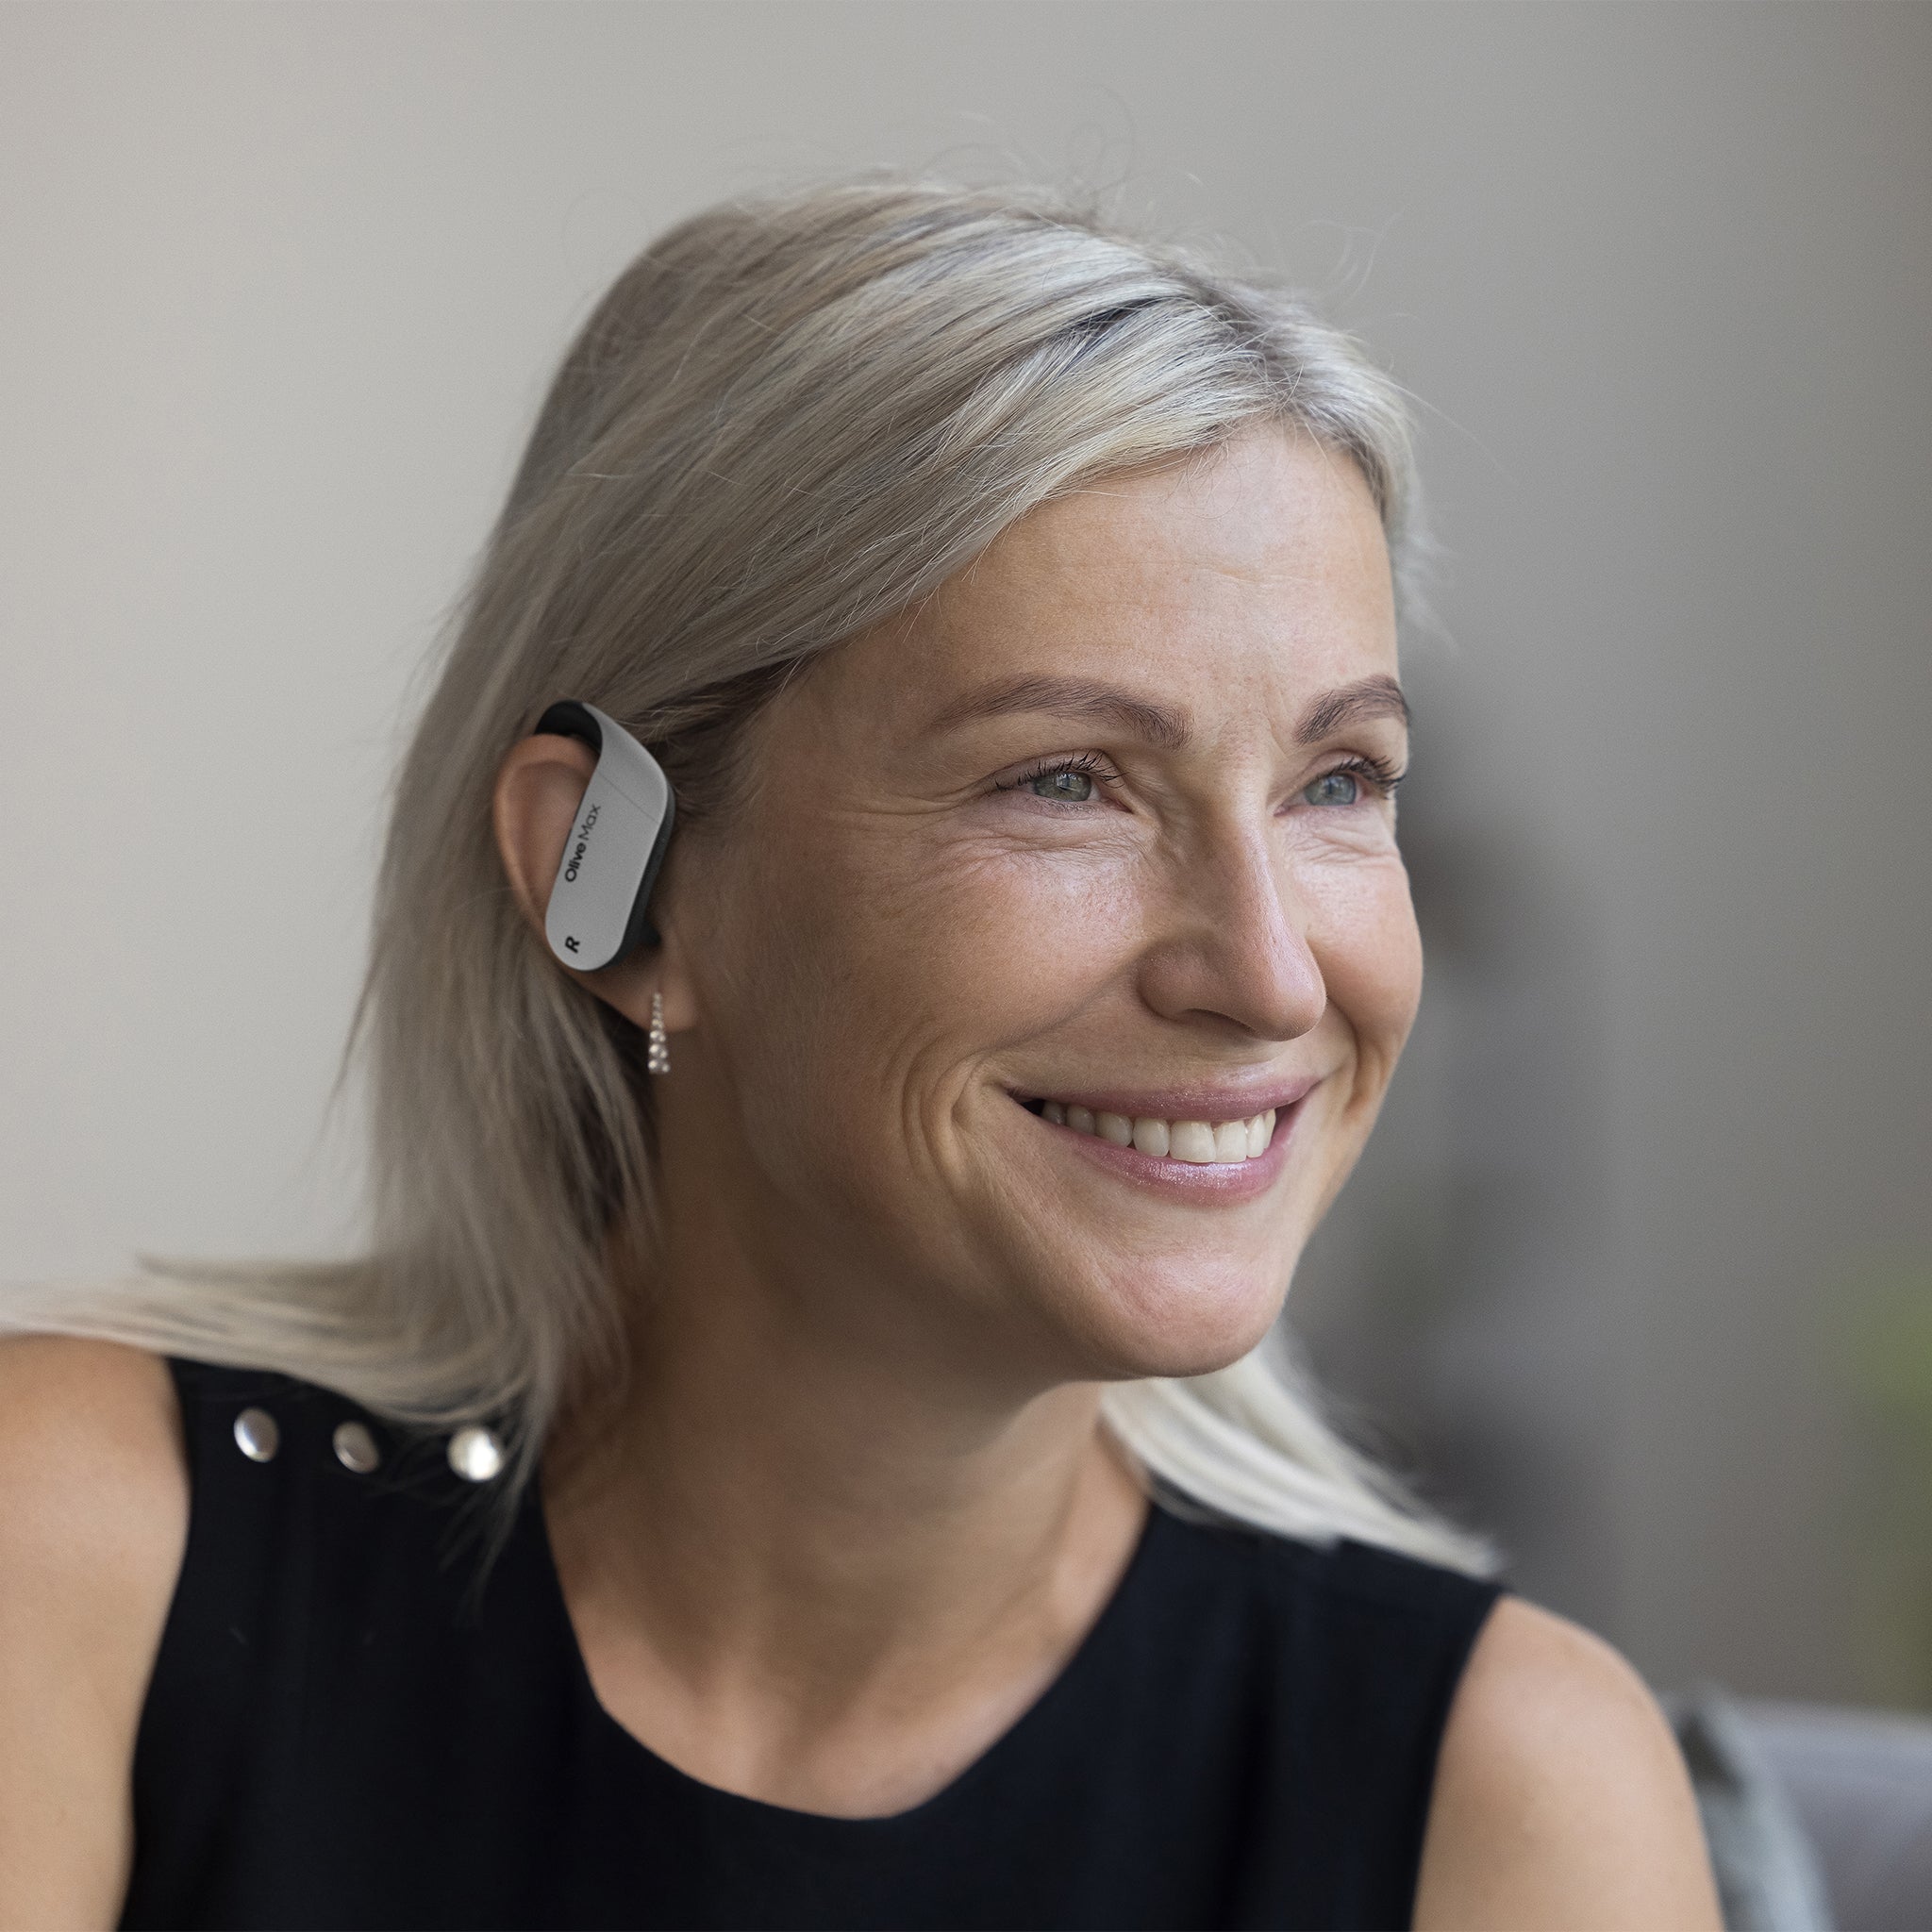 Olive Max OTC hearing aids : Louder, clearer sound, rechargeable bluetooth  ease - Olive Union